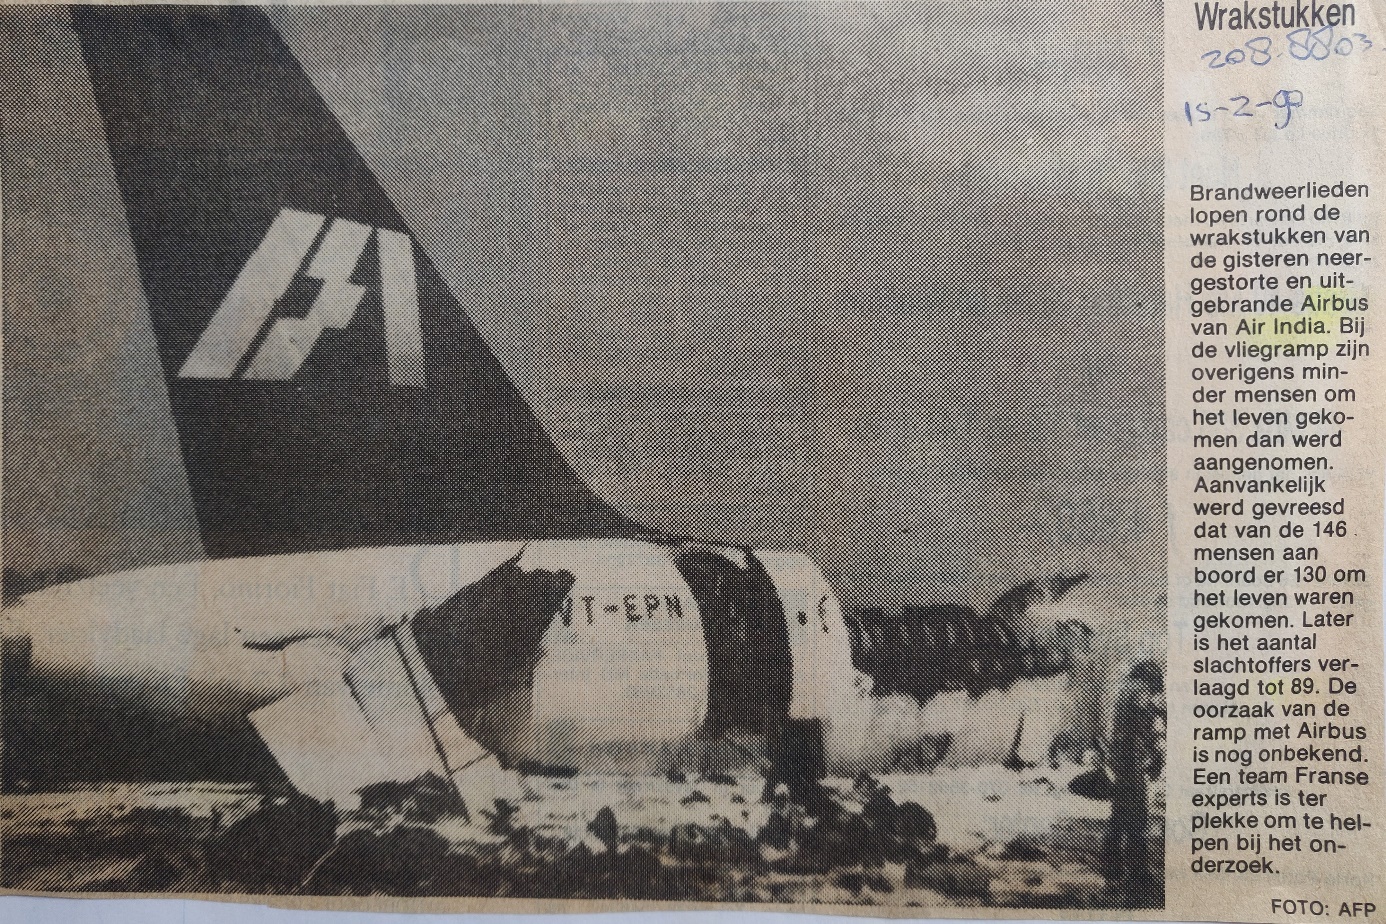 Airbus A320-200 | India Airbus | VT-EPN | newspaper photo of the wreckage 15 February 1990